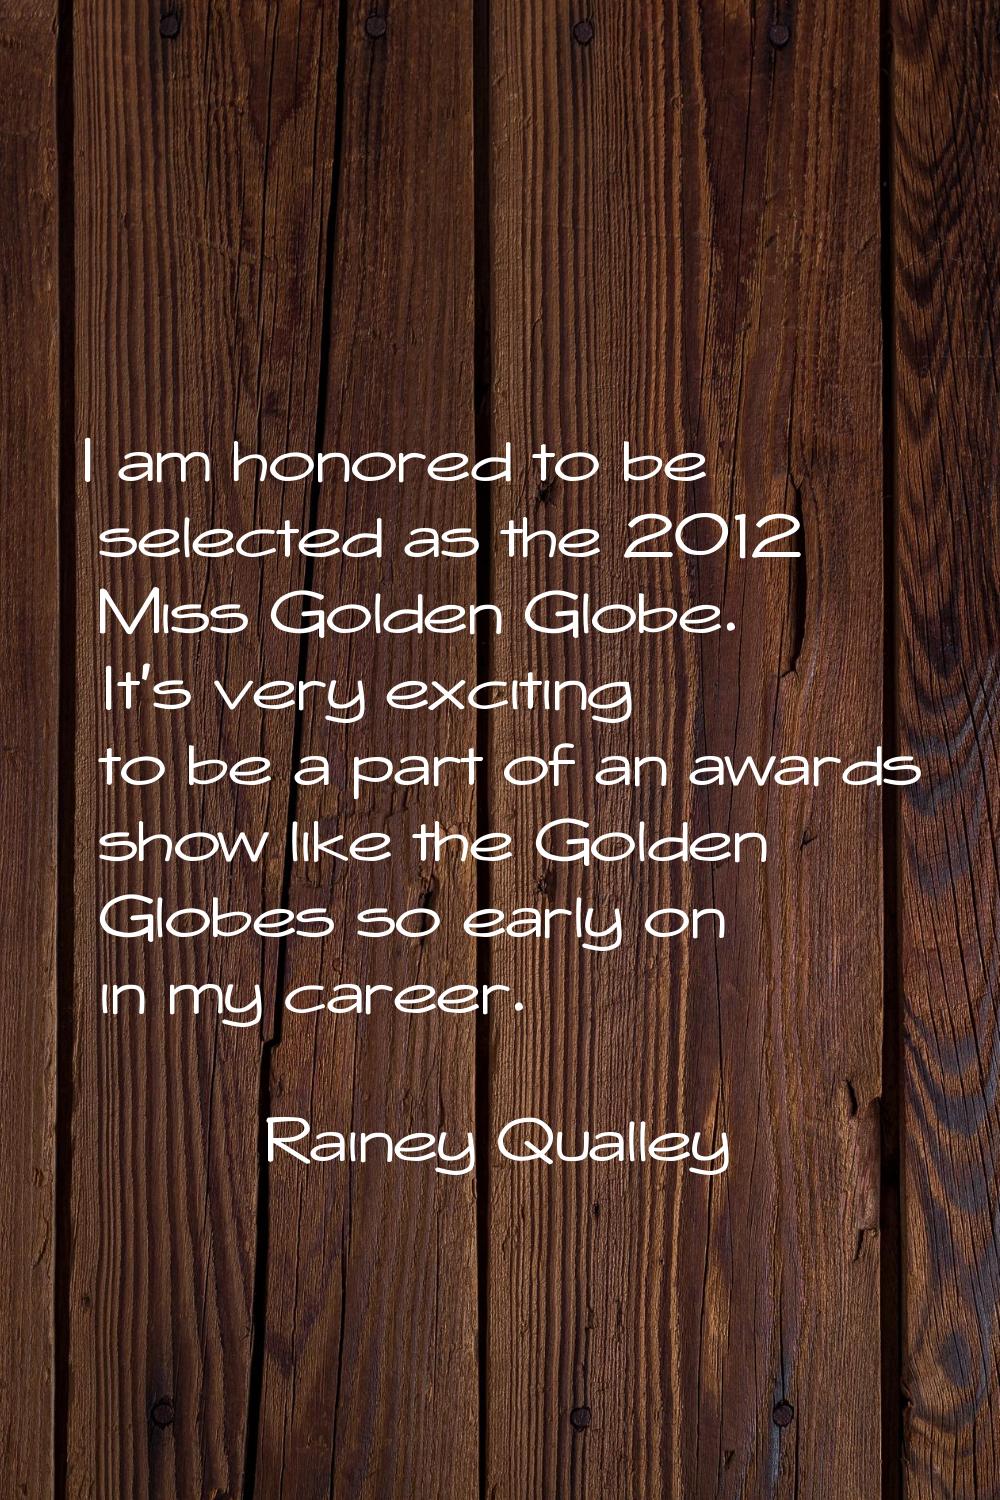 I am honored to be selected as the 2012 Miss Golden Globe. It's very exciting to be a part of an aw